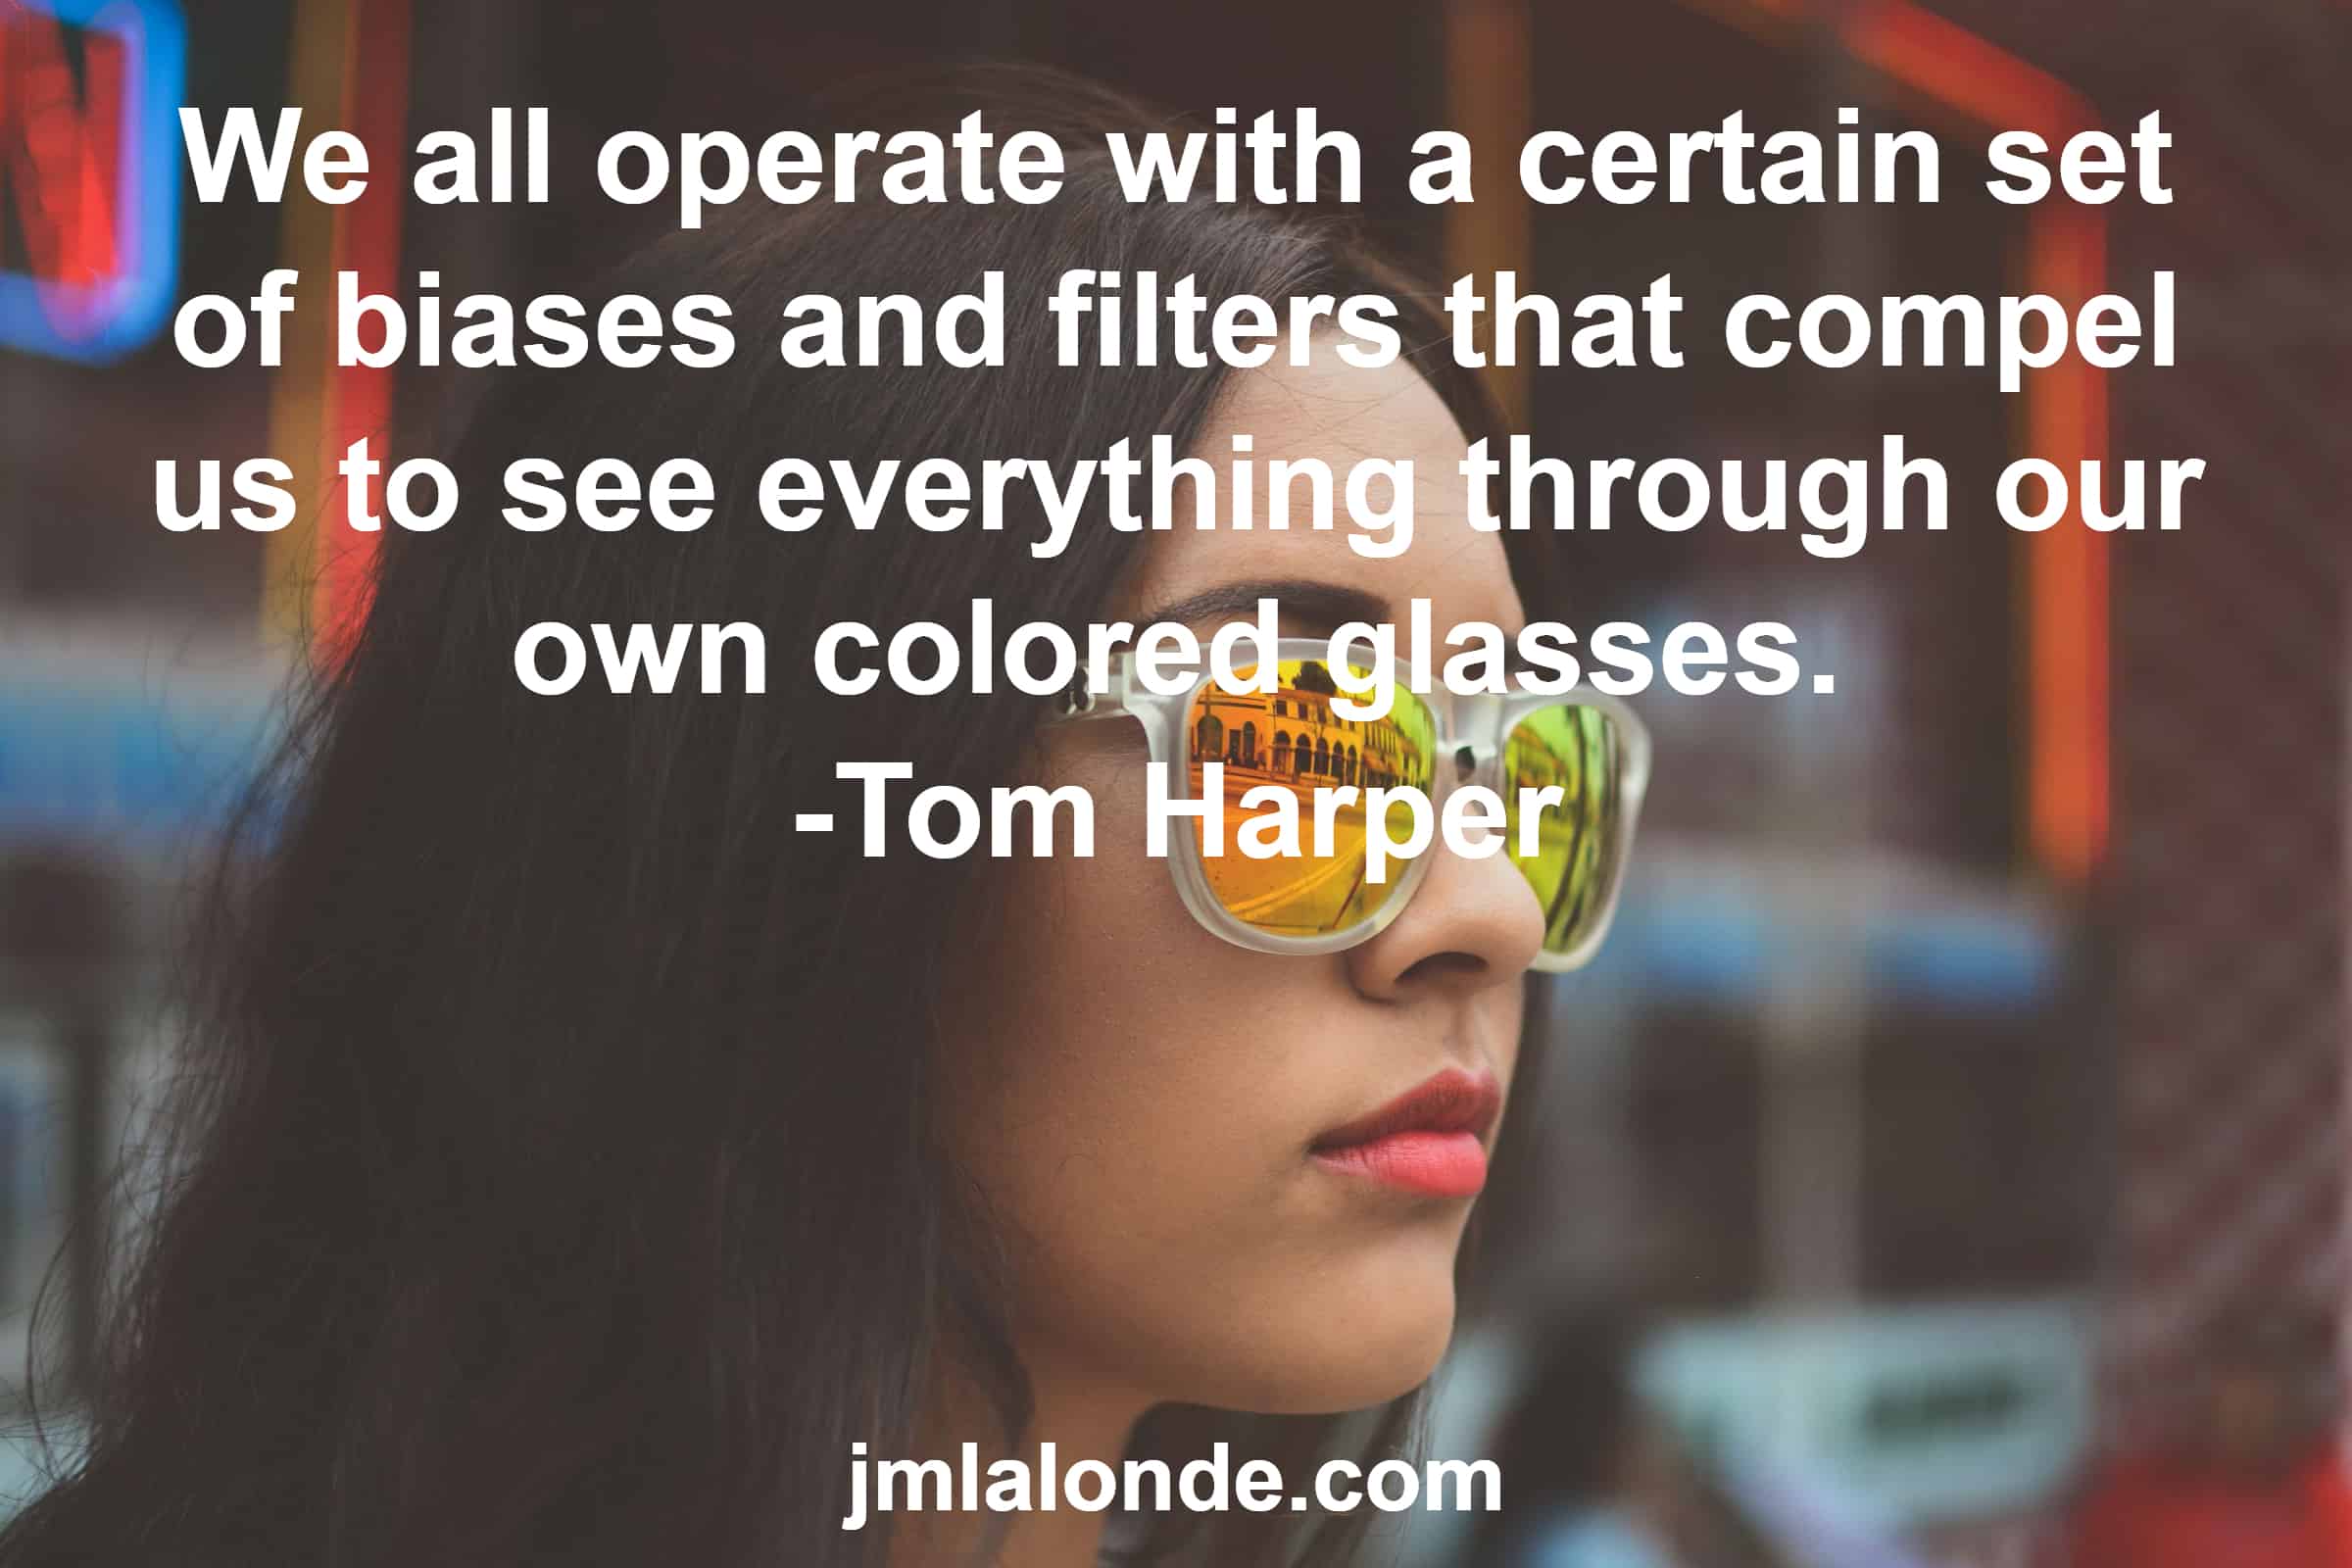 Be aware of the colored glasses you view reality through